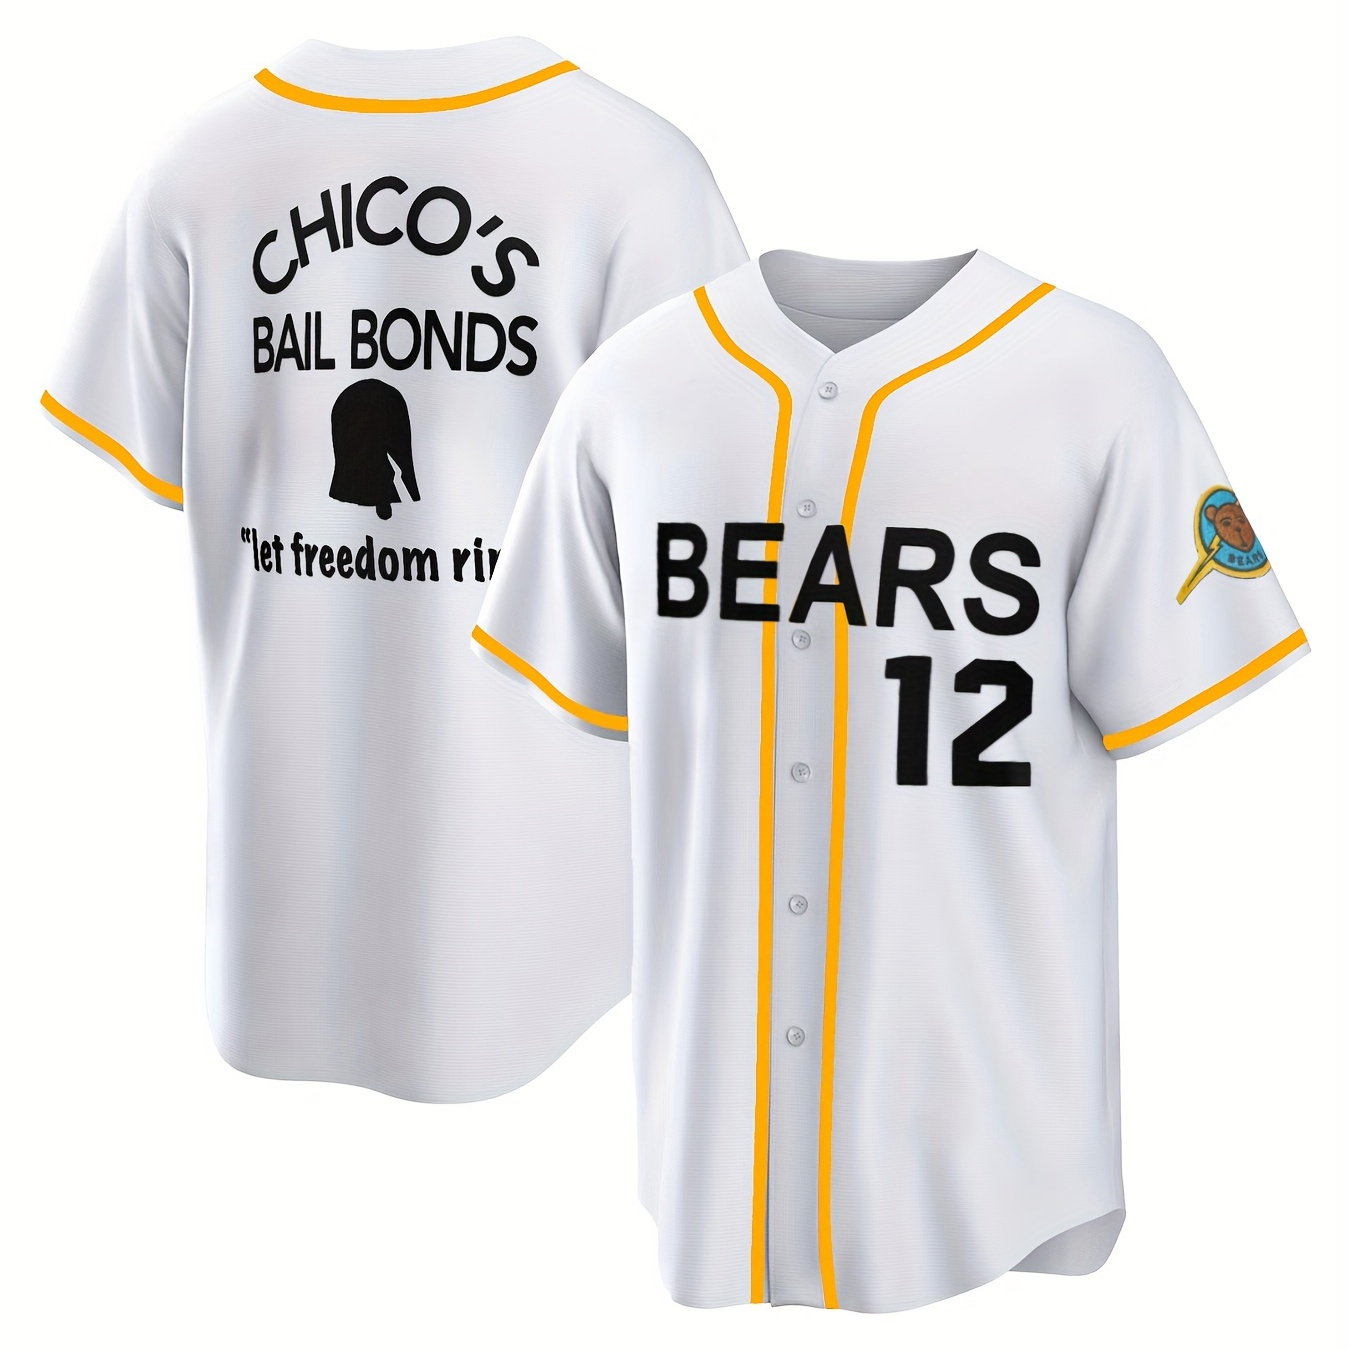 

Men's Bears 12 Embroidery Print Breathable Striped Baseball Jersey, Active V Neck Short Sleeve Uniform For Training Competition